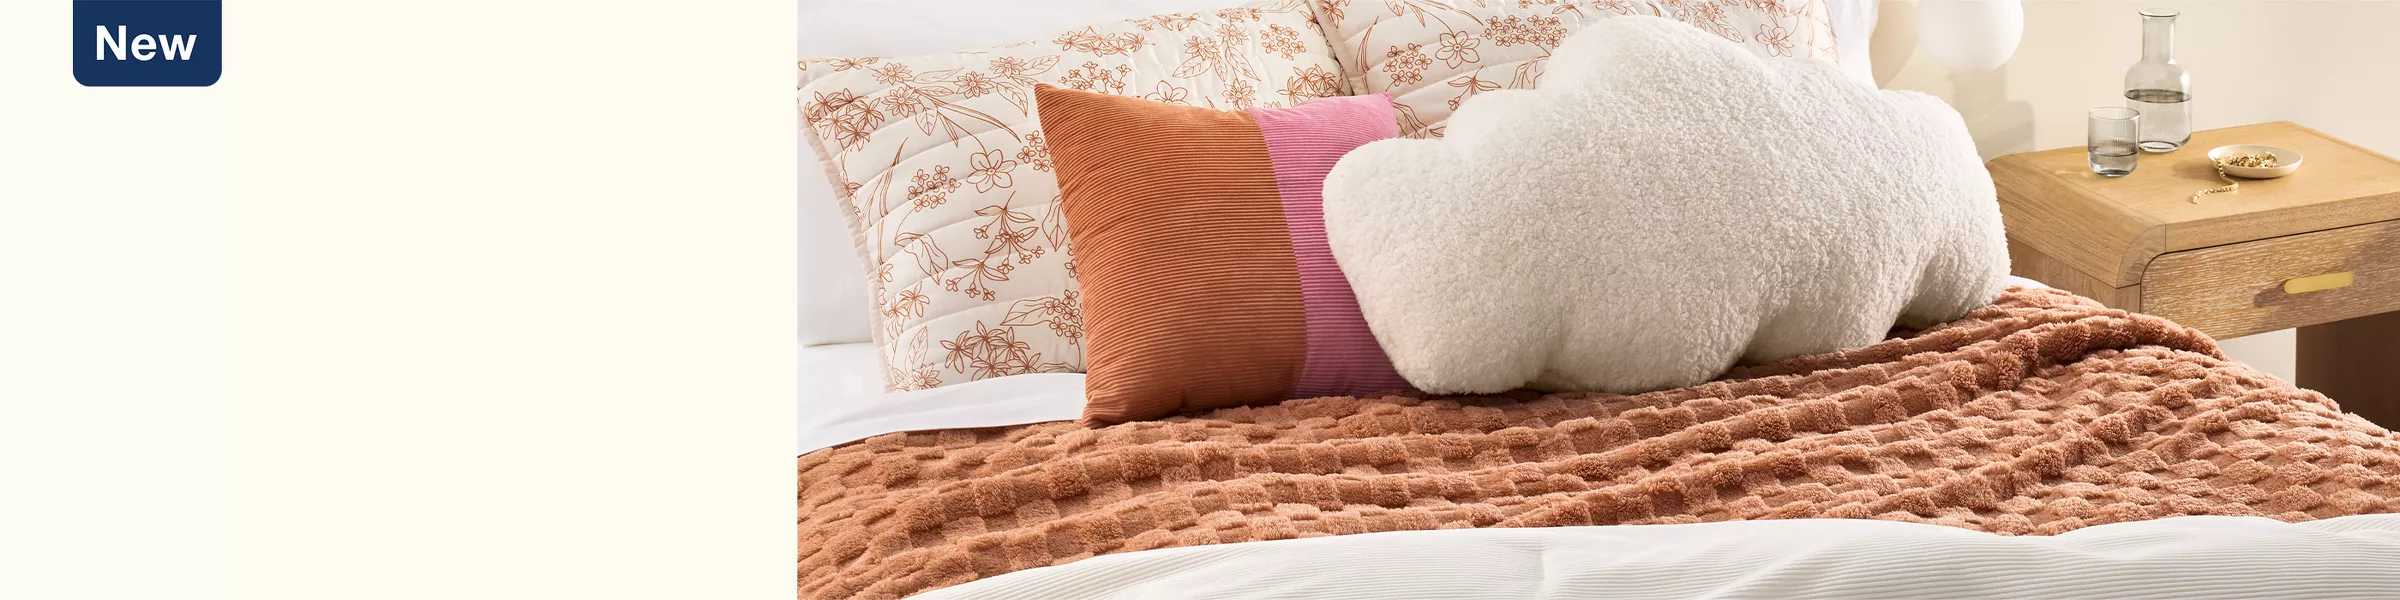 An orange checkered blanket lays on a white comforter. 2 big white pillows with orange florals are at the bed top. An orange & pink color-blocked pillow & a fluffy cloud-shaped pillow sit in front. Warm colors & a mix of textures make a cozy room.  